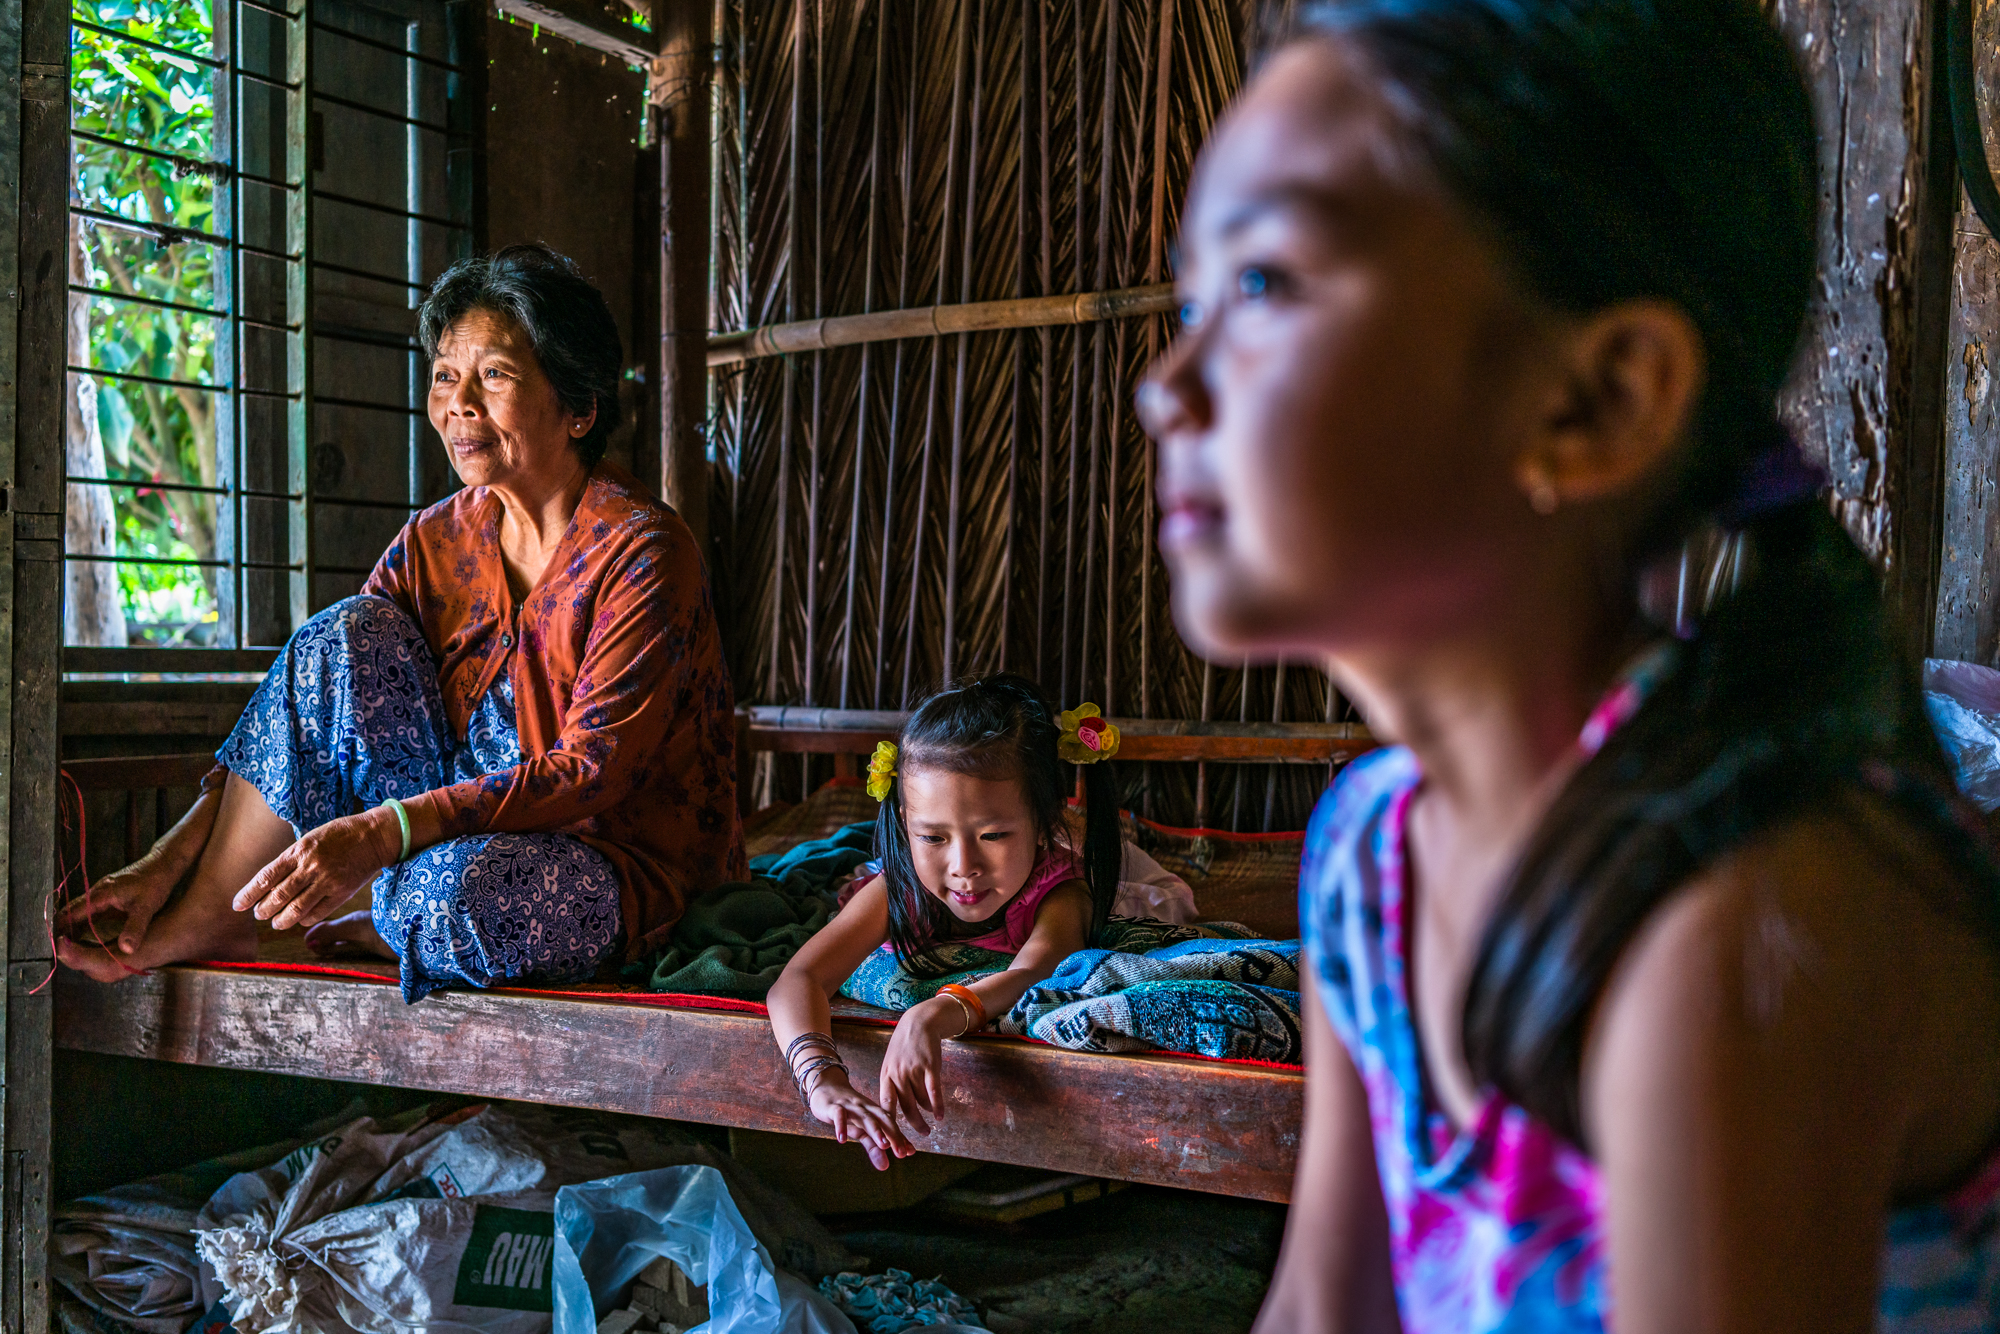 A grandmother and her grandchild in their rural home in the Mekong Delta region of Vietnam